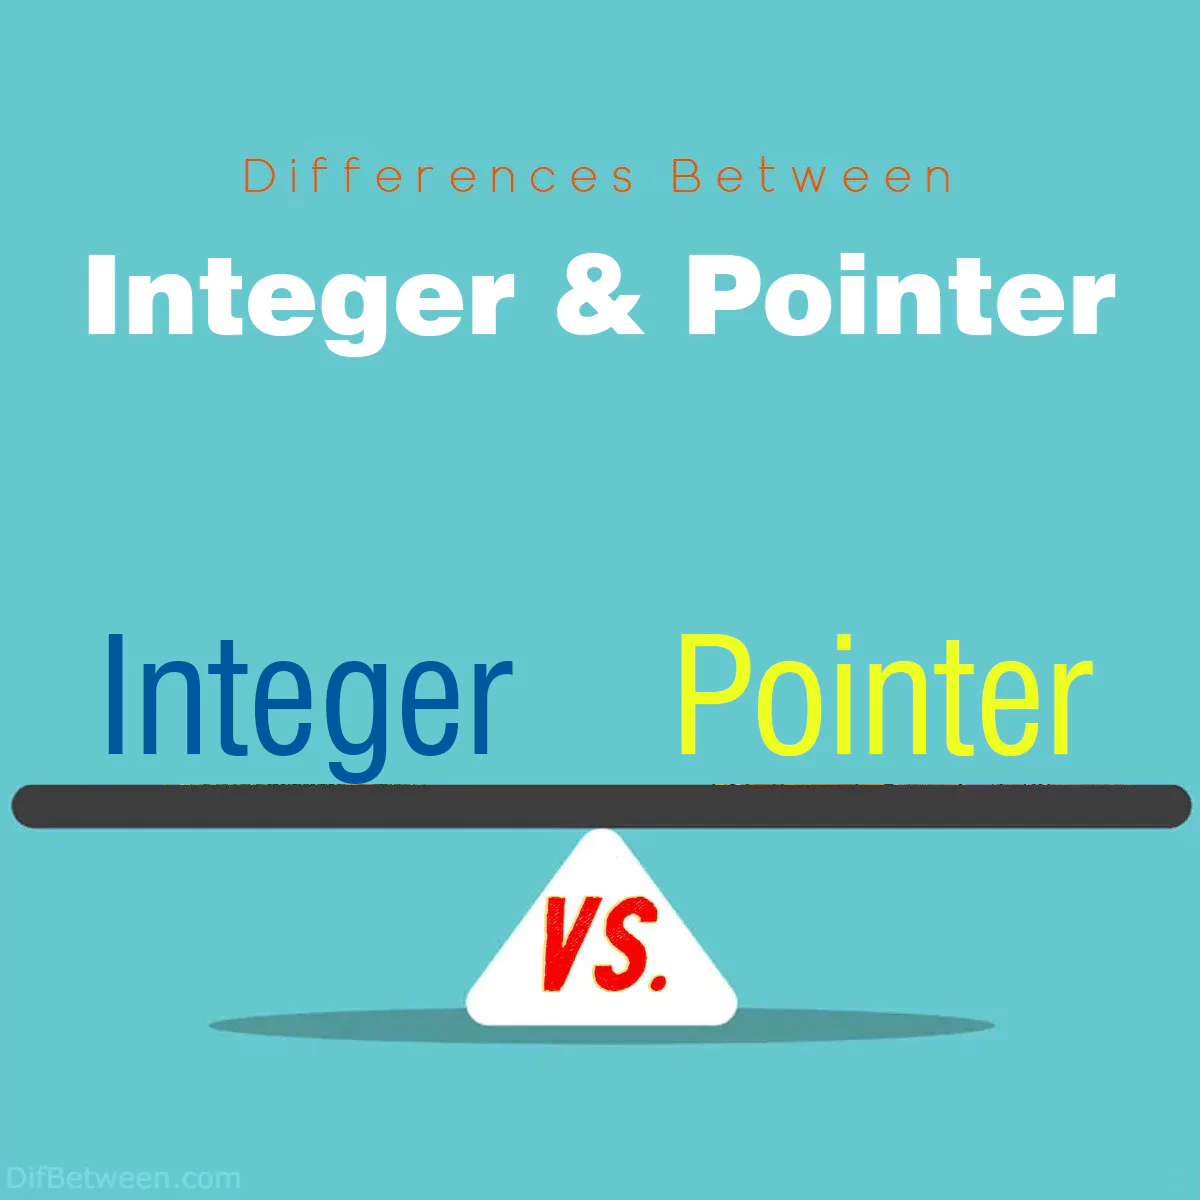 Differences Between Integer and Pointer